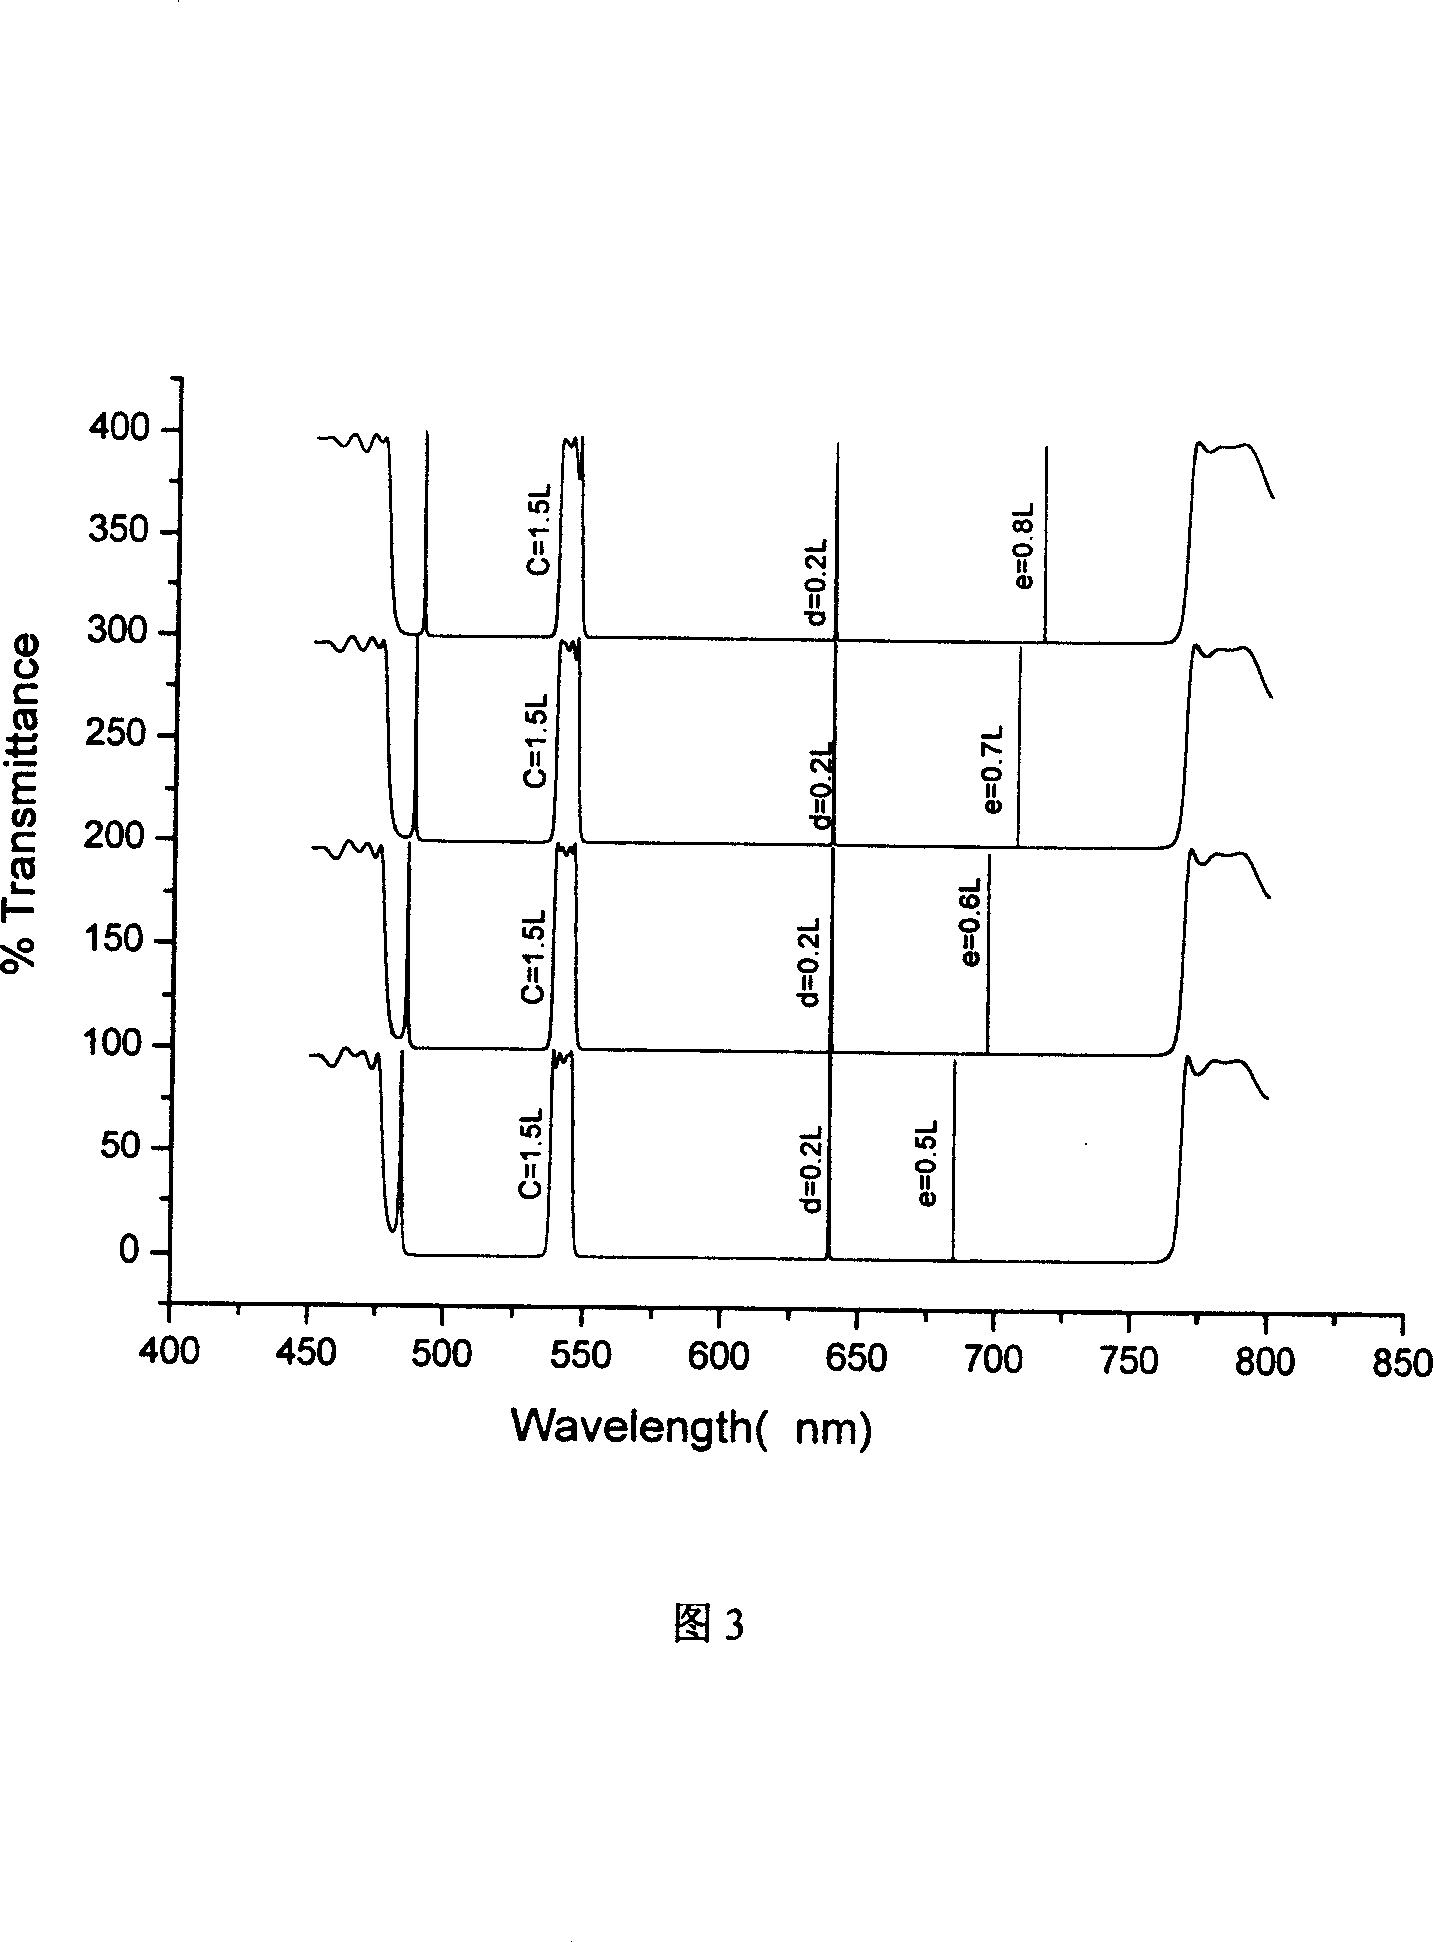 Channel passband relative position independently regulatable one-passband two-channel filter